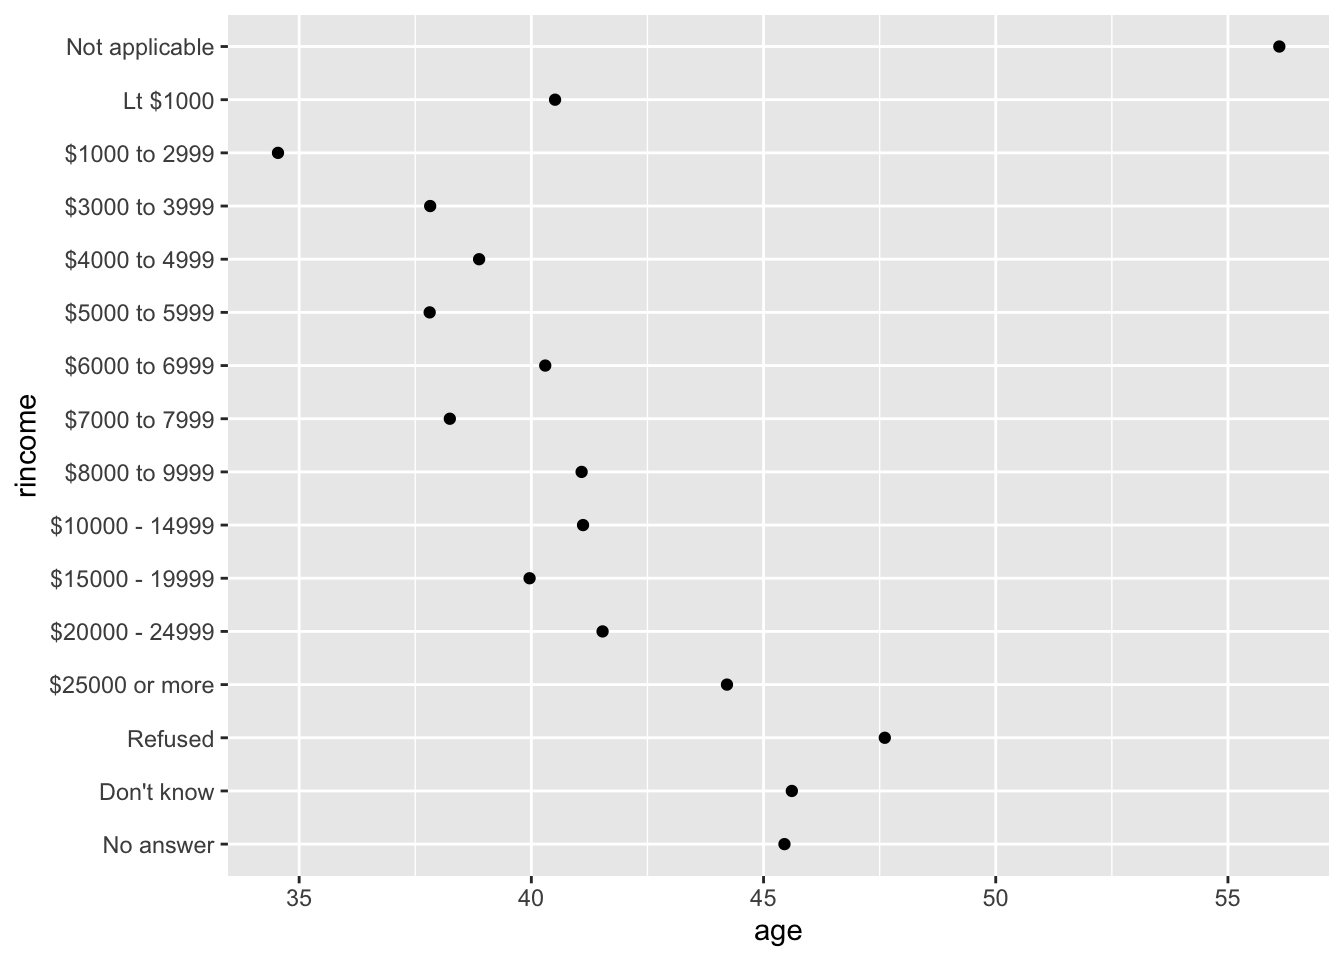 A scatterplot with age on the x-axis and income on the y-axis. Income has been reordered in order of average age which doesn't make much sense. One section of the y-axis goes from $6000-6999, then <$1000, then $8000-9999.